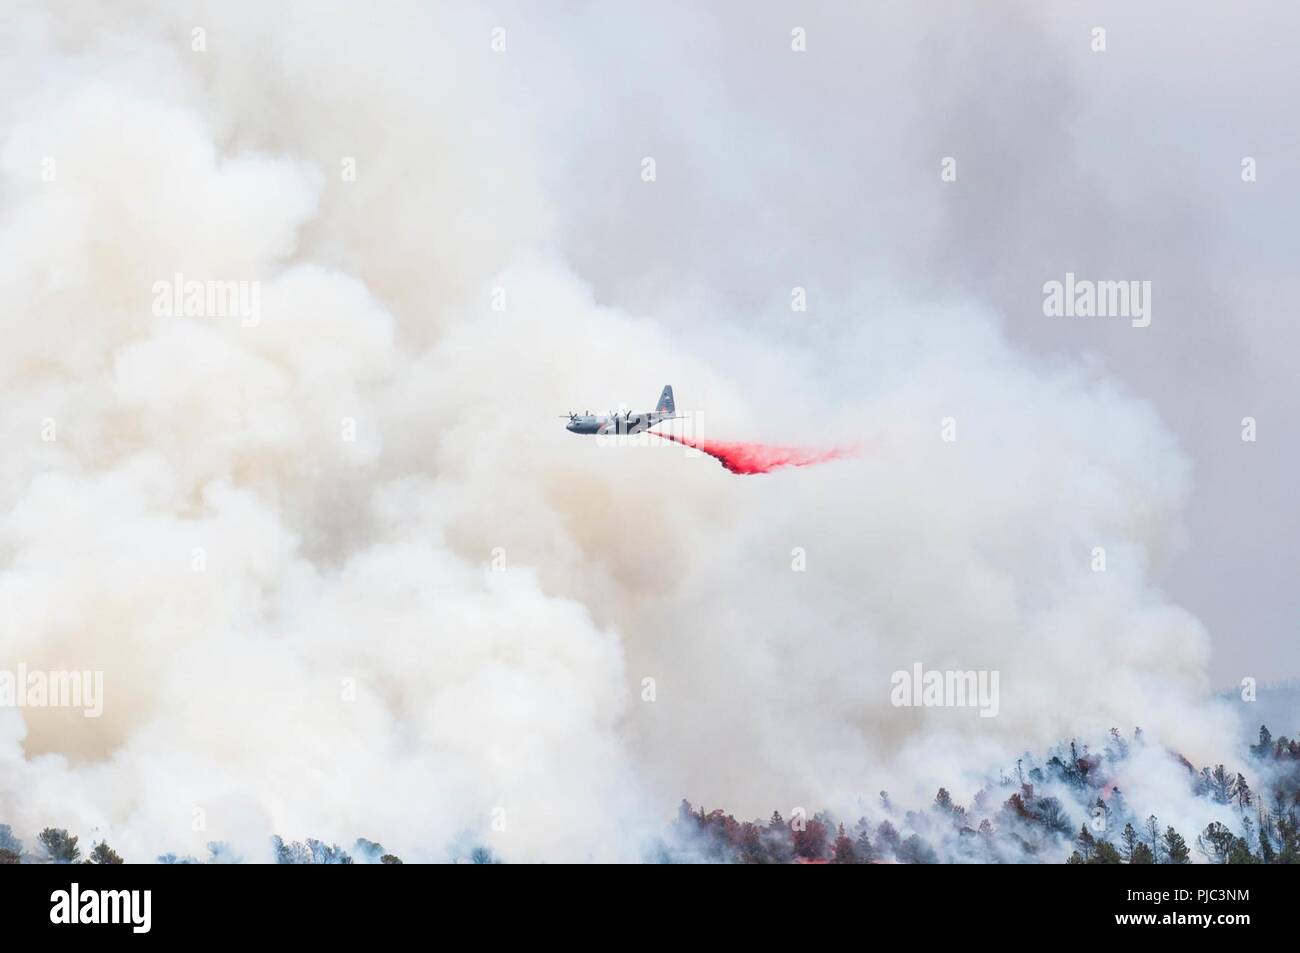 An Air Force C-130 Hercules aircraft, equipped with a Modular Airborne Firefighting System, drops slurry to support fire suppression efforts July 4, 2018. The mission is provided by the Department of Defense at the request of the U.S. Forest Service, which owns the MAFFS equipment and provides the slurry. Stock Photo